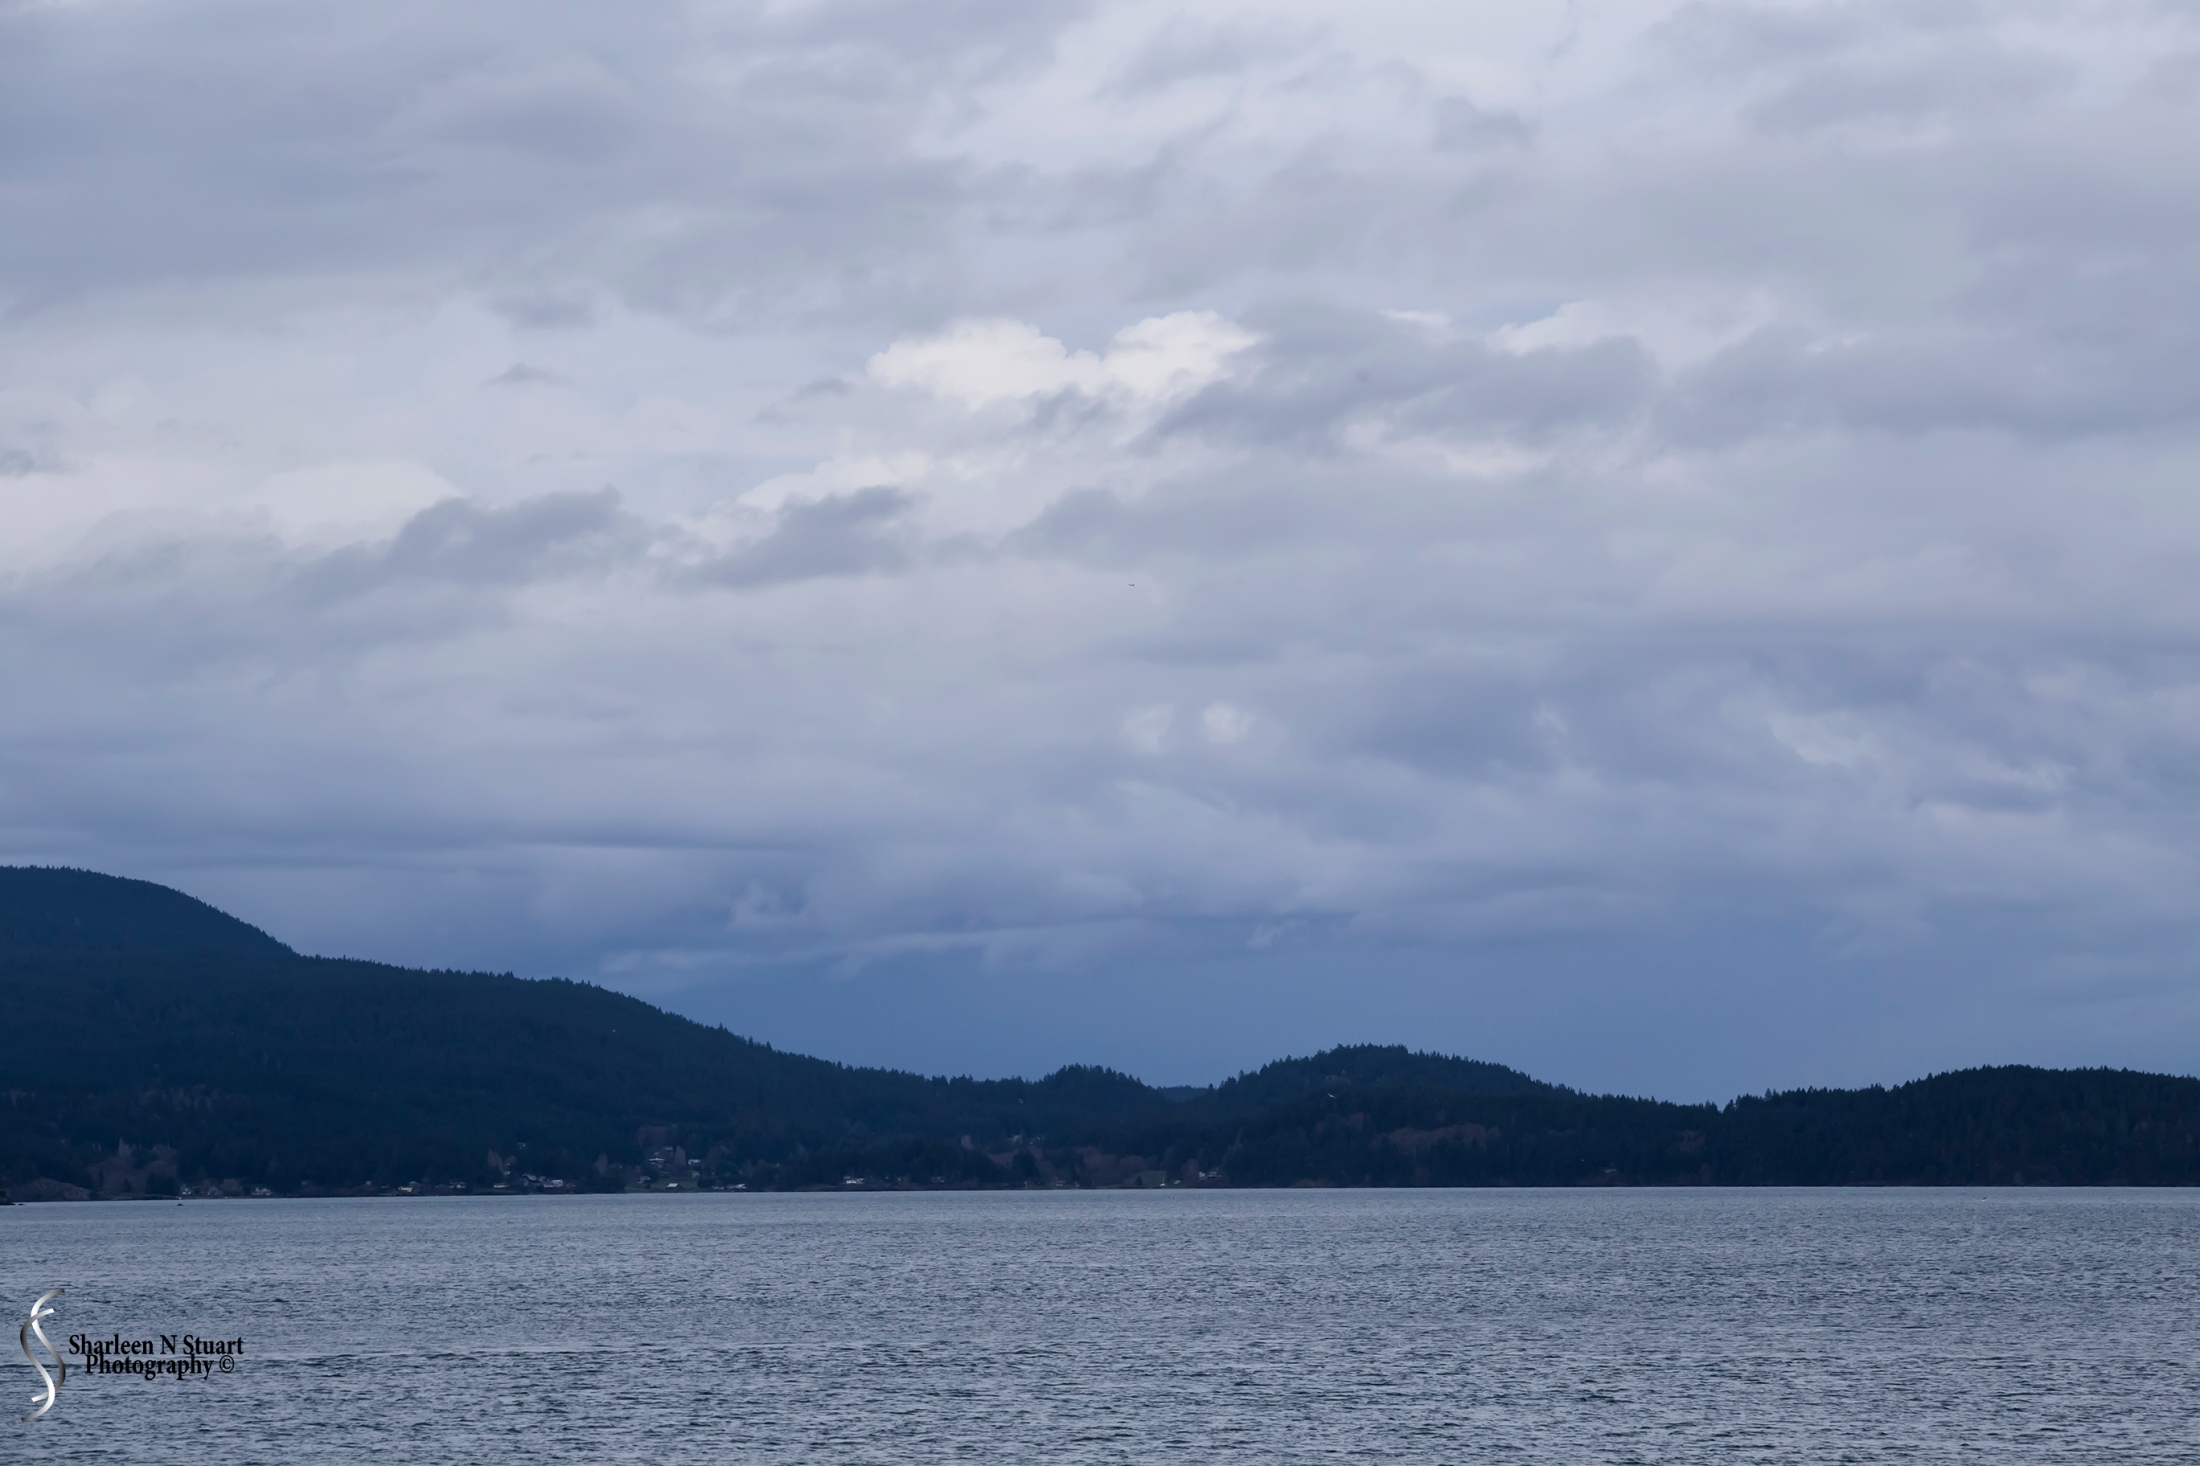 It was with sadness that we left Friday Harbor. I think there was more to see but we did run out of time. Our day was good. A few drops of rain but nothing we could not deal with. Leaving Friday Harbor, the closing day is cloudy and overcast.